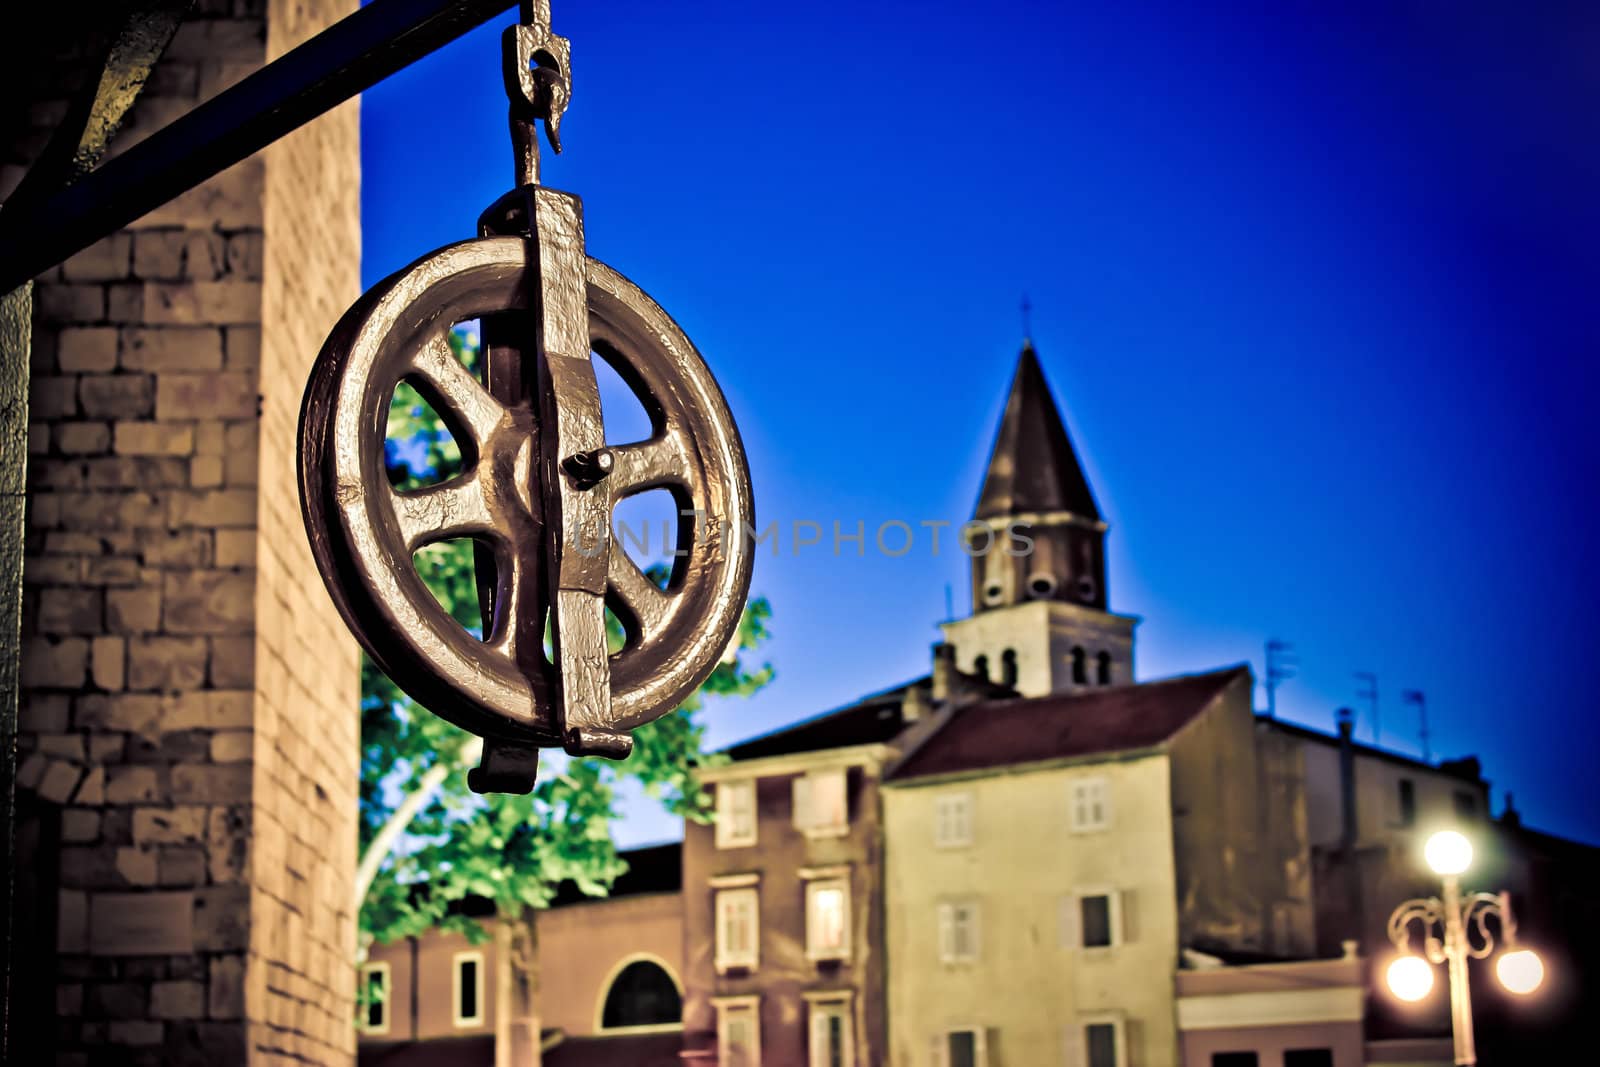 Five wells square pulley in Zadar by xbrchx